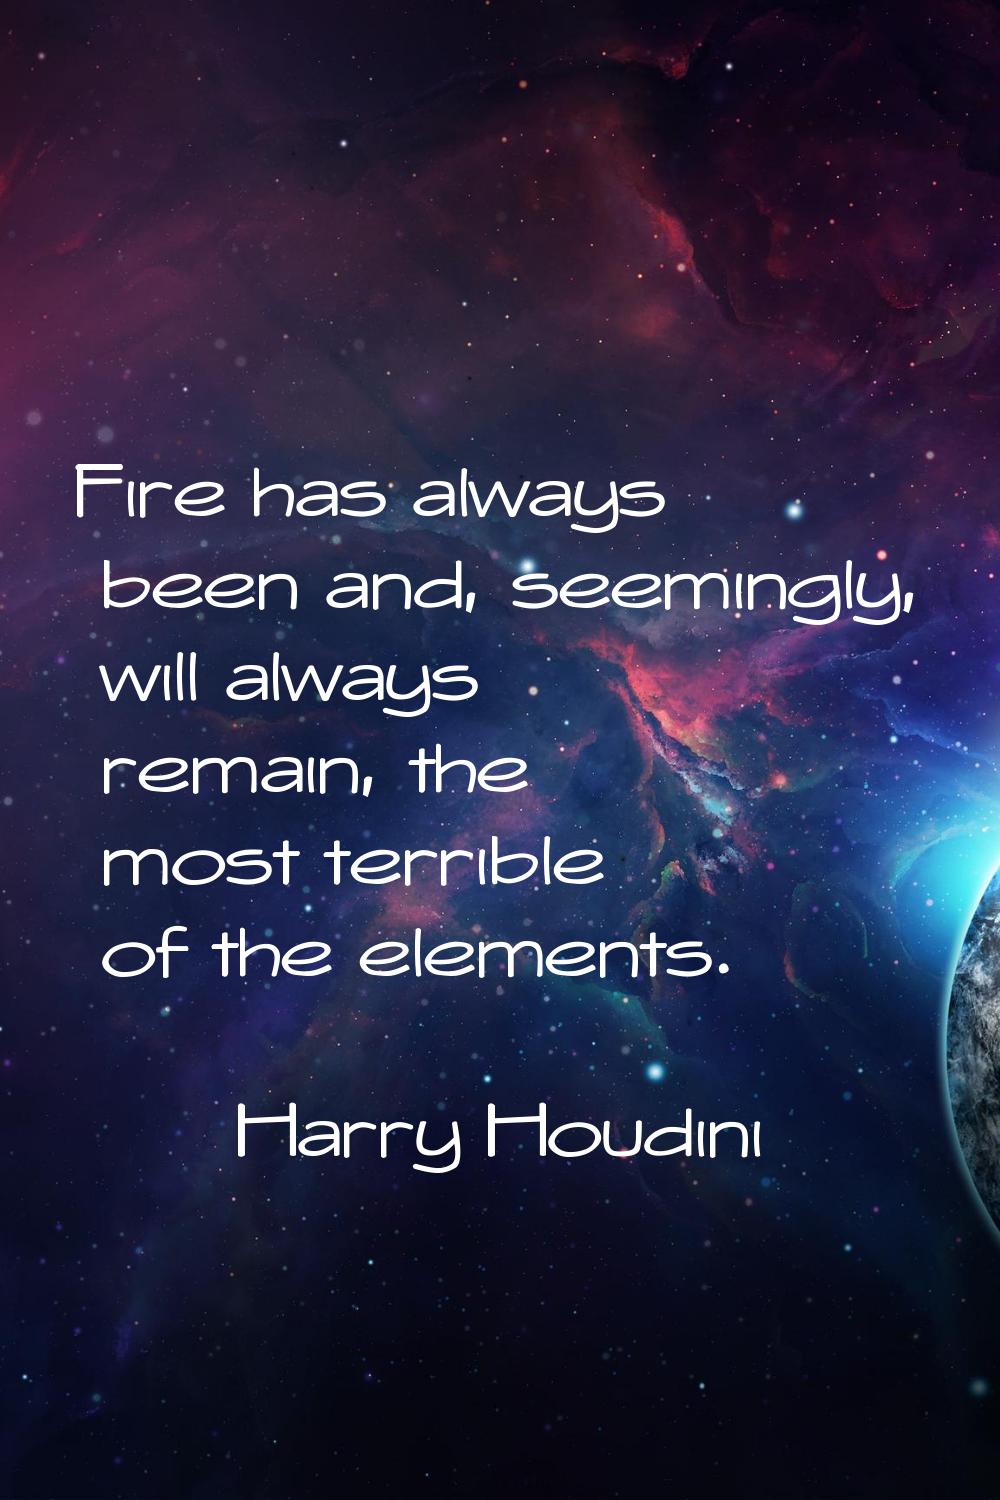 Fire has always been and, seemingly, will always remain, the most terrible of the elements.